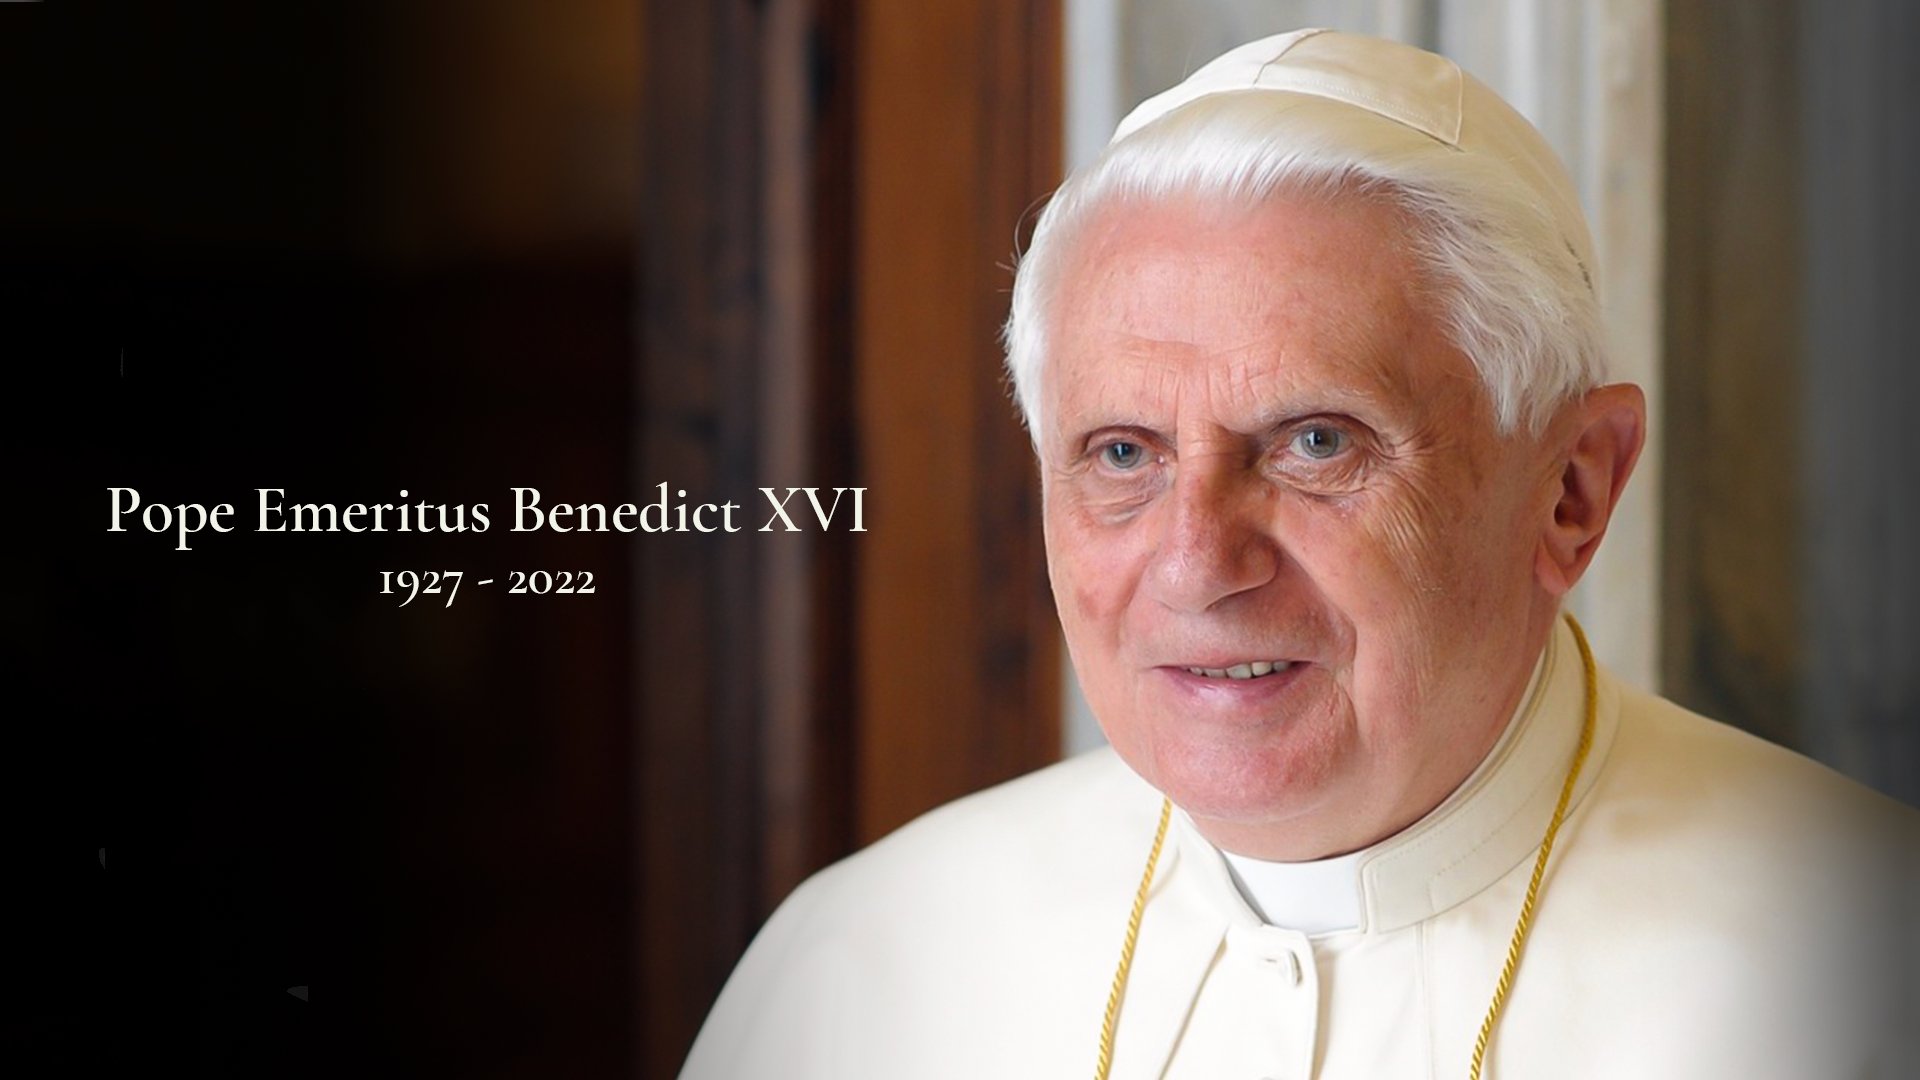 Bred vifte komme ud for romantisk New Era Newspaper on Twitter: "JUST IN | Former Pope Benedict, who resigned  as head of the Catholic Church in 2013, has died at the age of 95.  https://t.co/IaA3sZn0yj" / Twitter